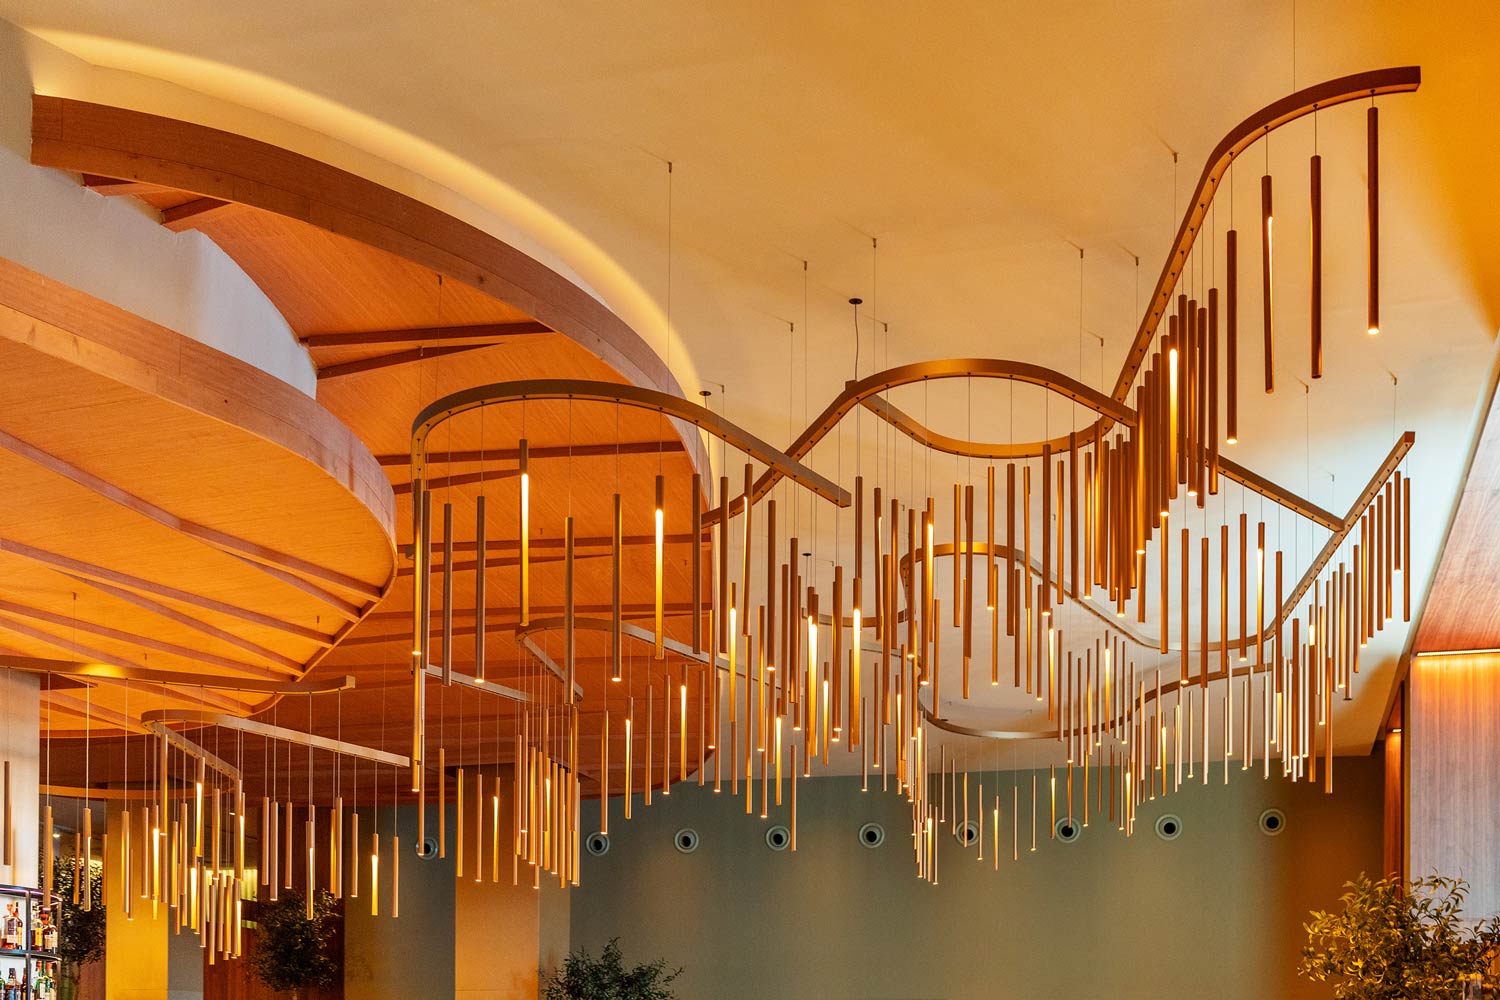 a customised lighting design in a hotel lobby with curved structure supporting metal rods